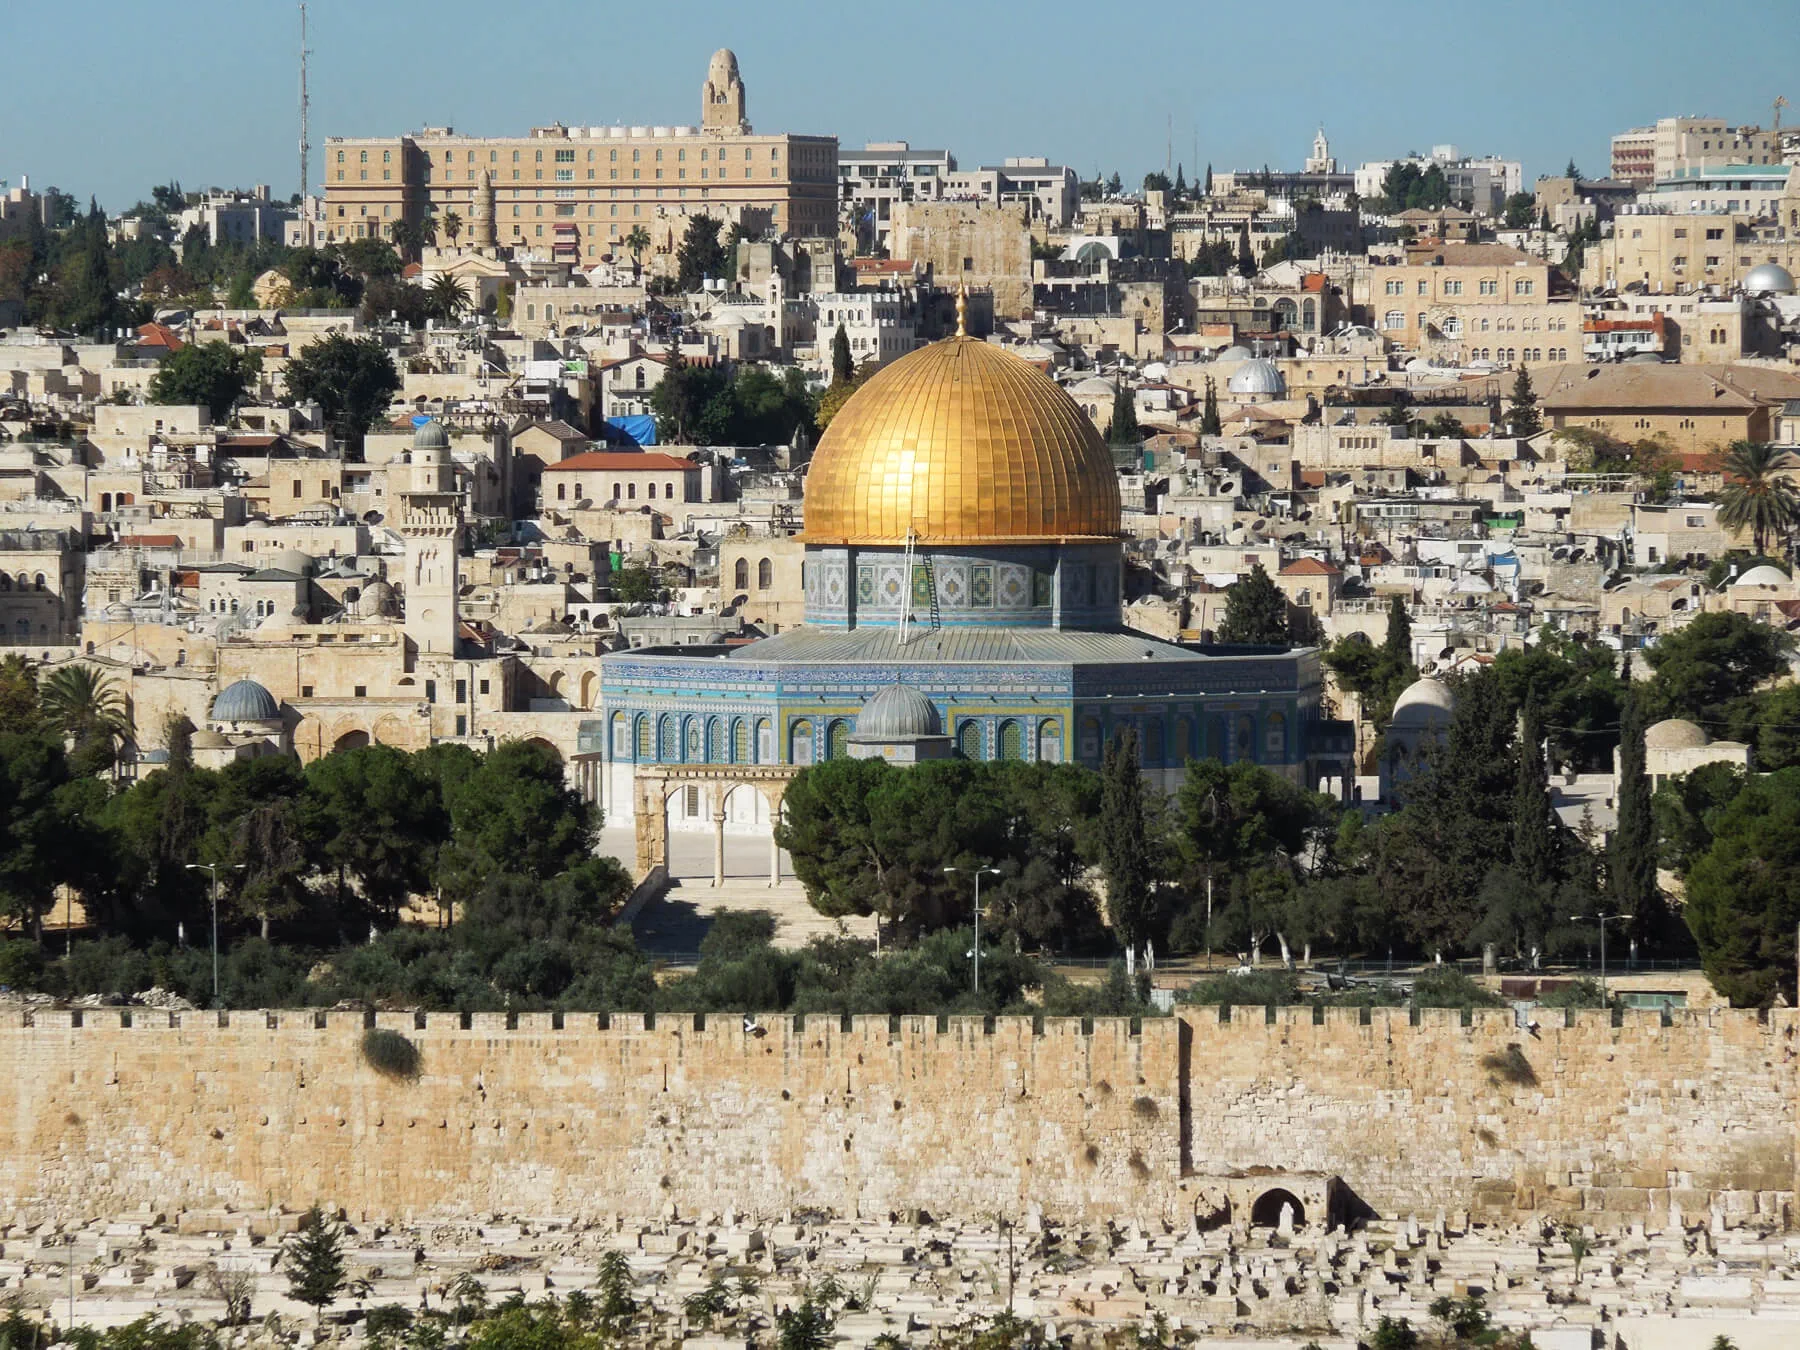 Jerusalem's Dome of the Rock marks the site where Jews believe Abraham was preparing to sacrifice his son Isaac and where Muslims believe the Prophet Muhammad journeyed to heaven